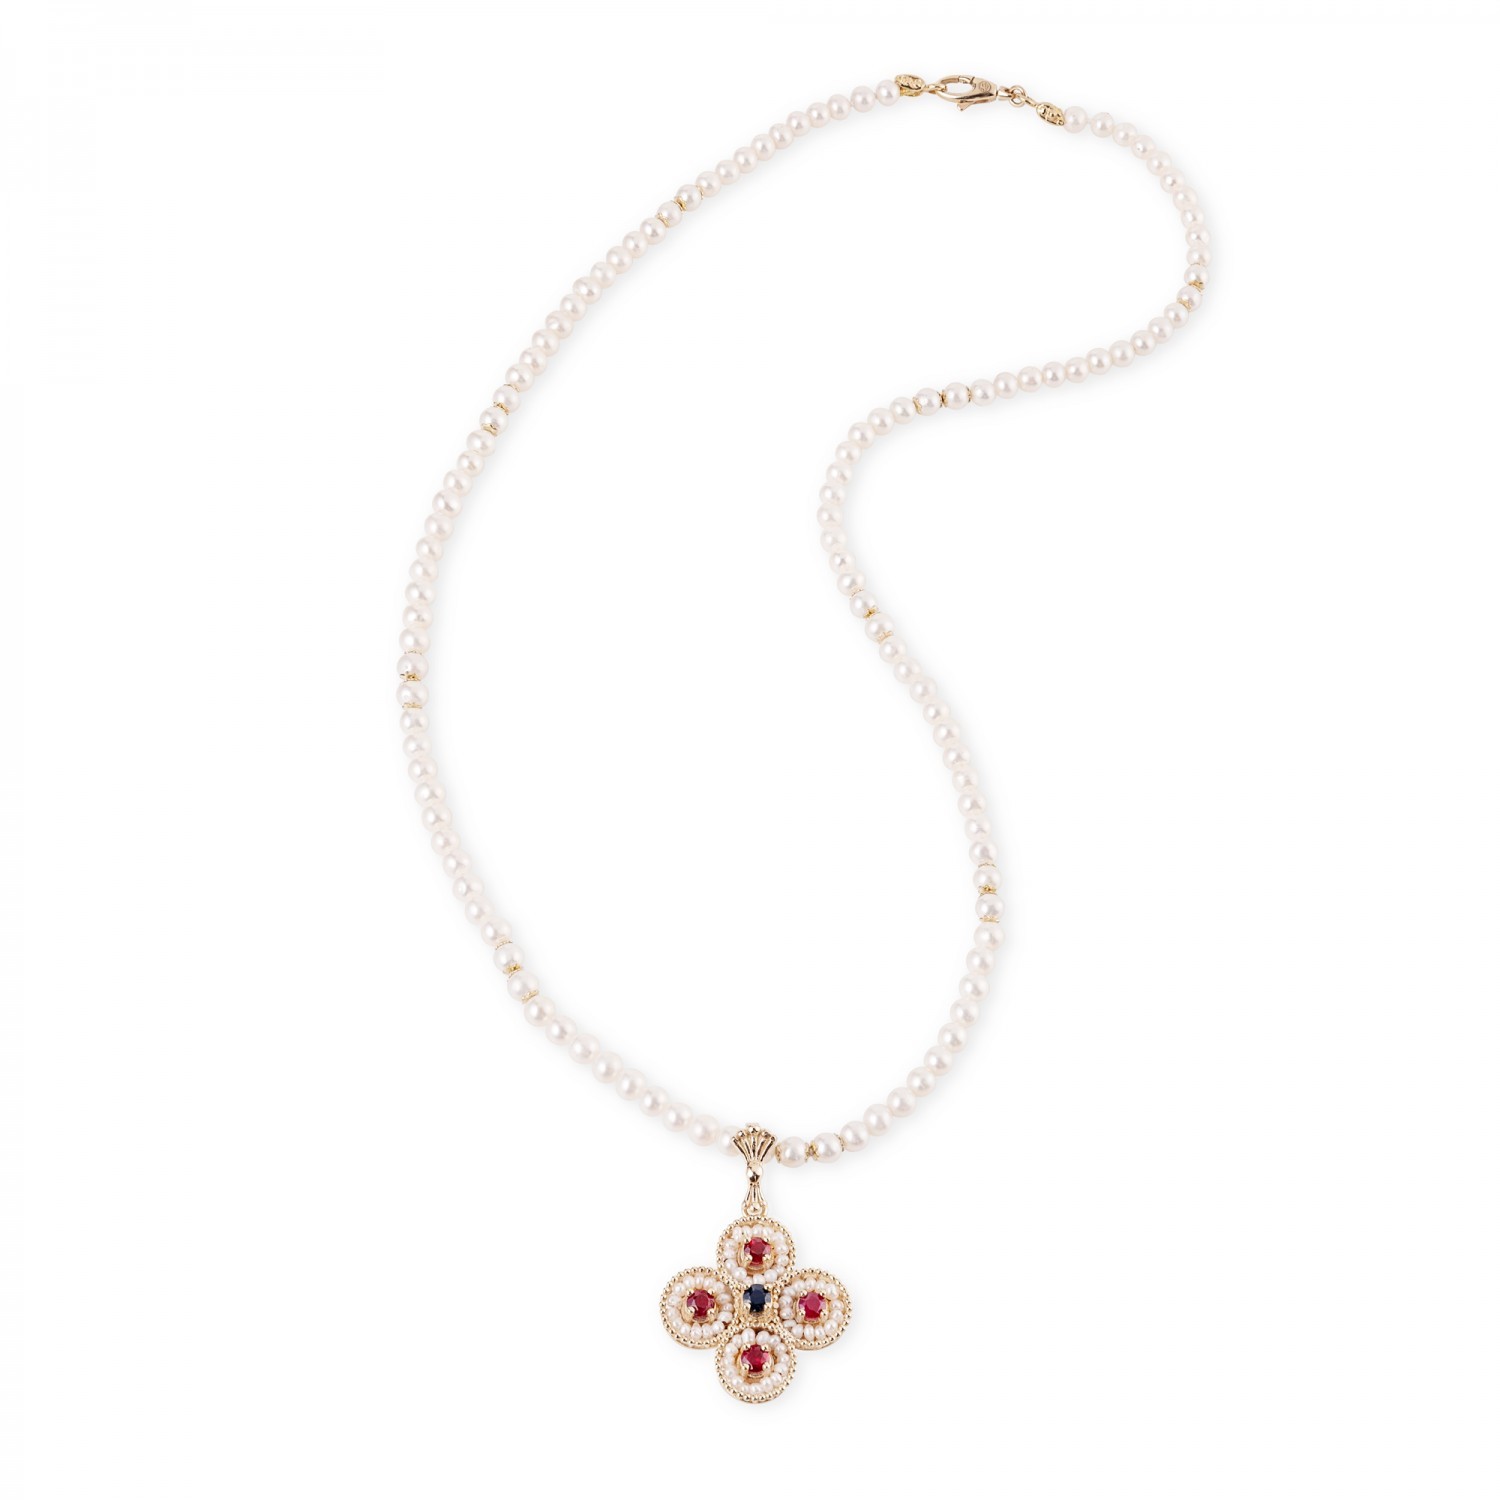 Gerardo Sacco Necklace with Pearls and Gold Pendant